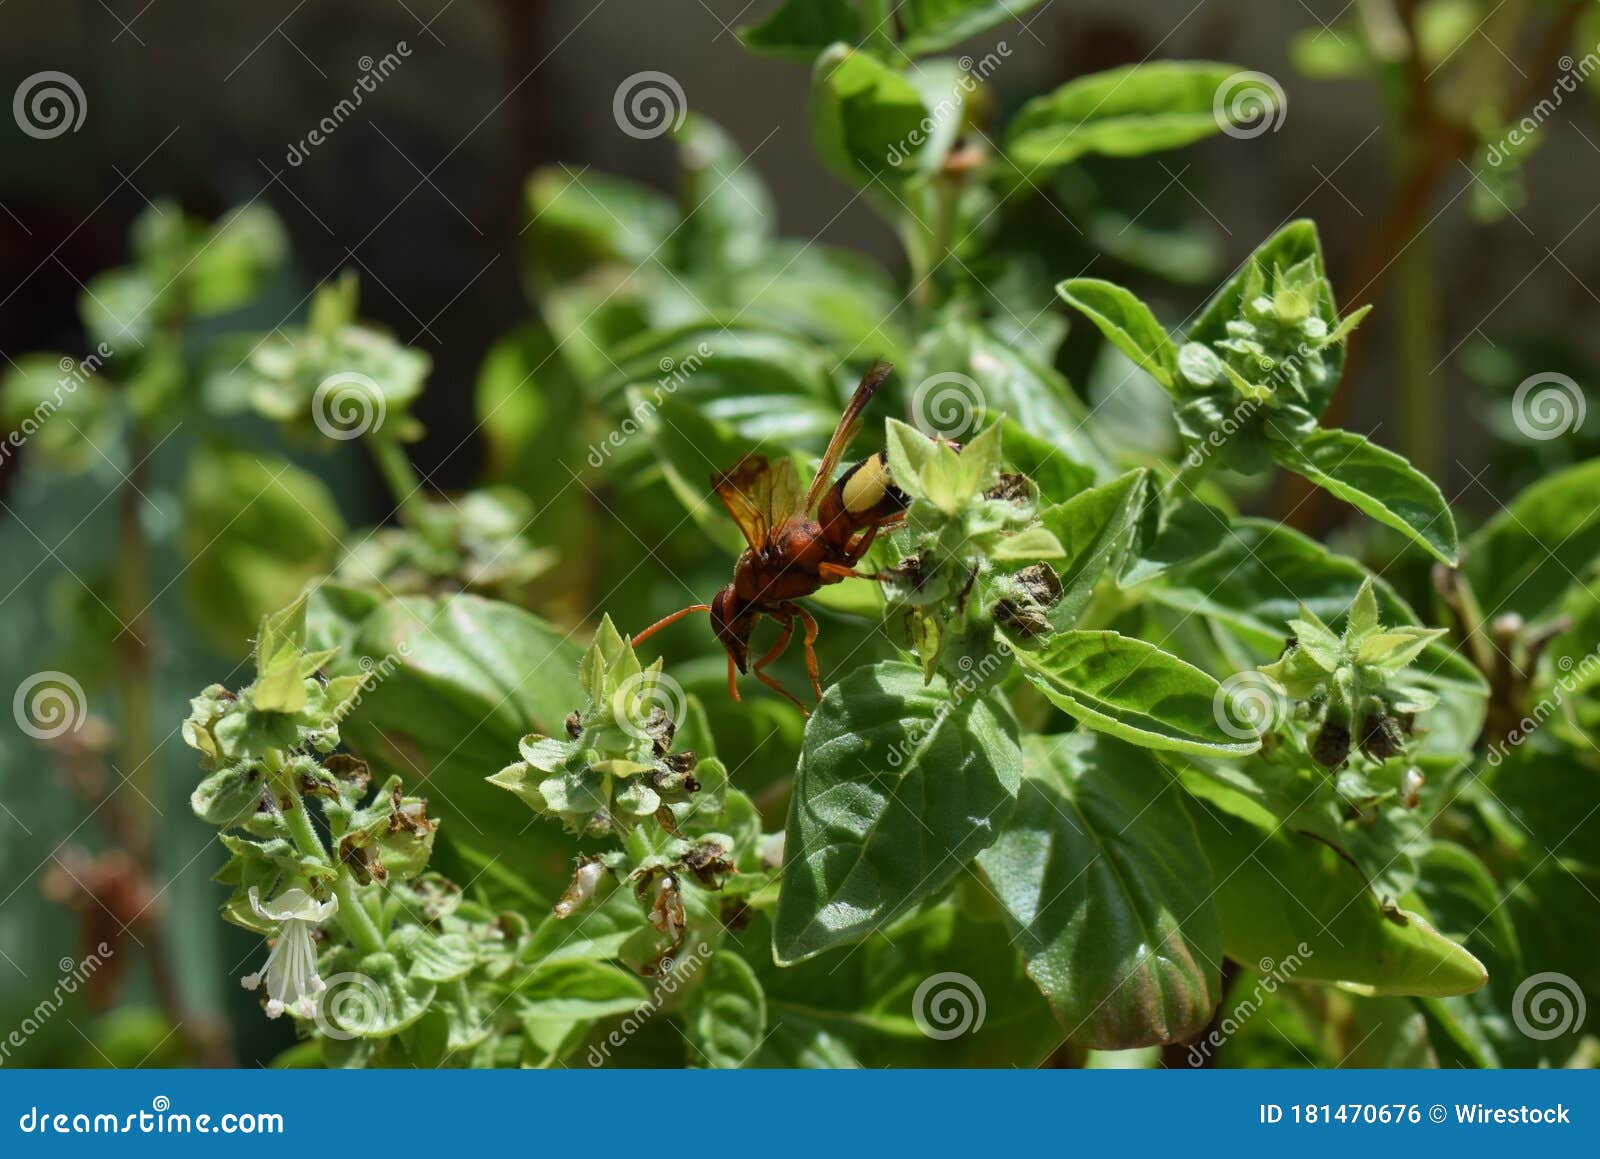 oriental hornet wasp searching for food on the leaves of the plant